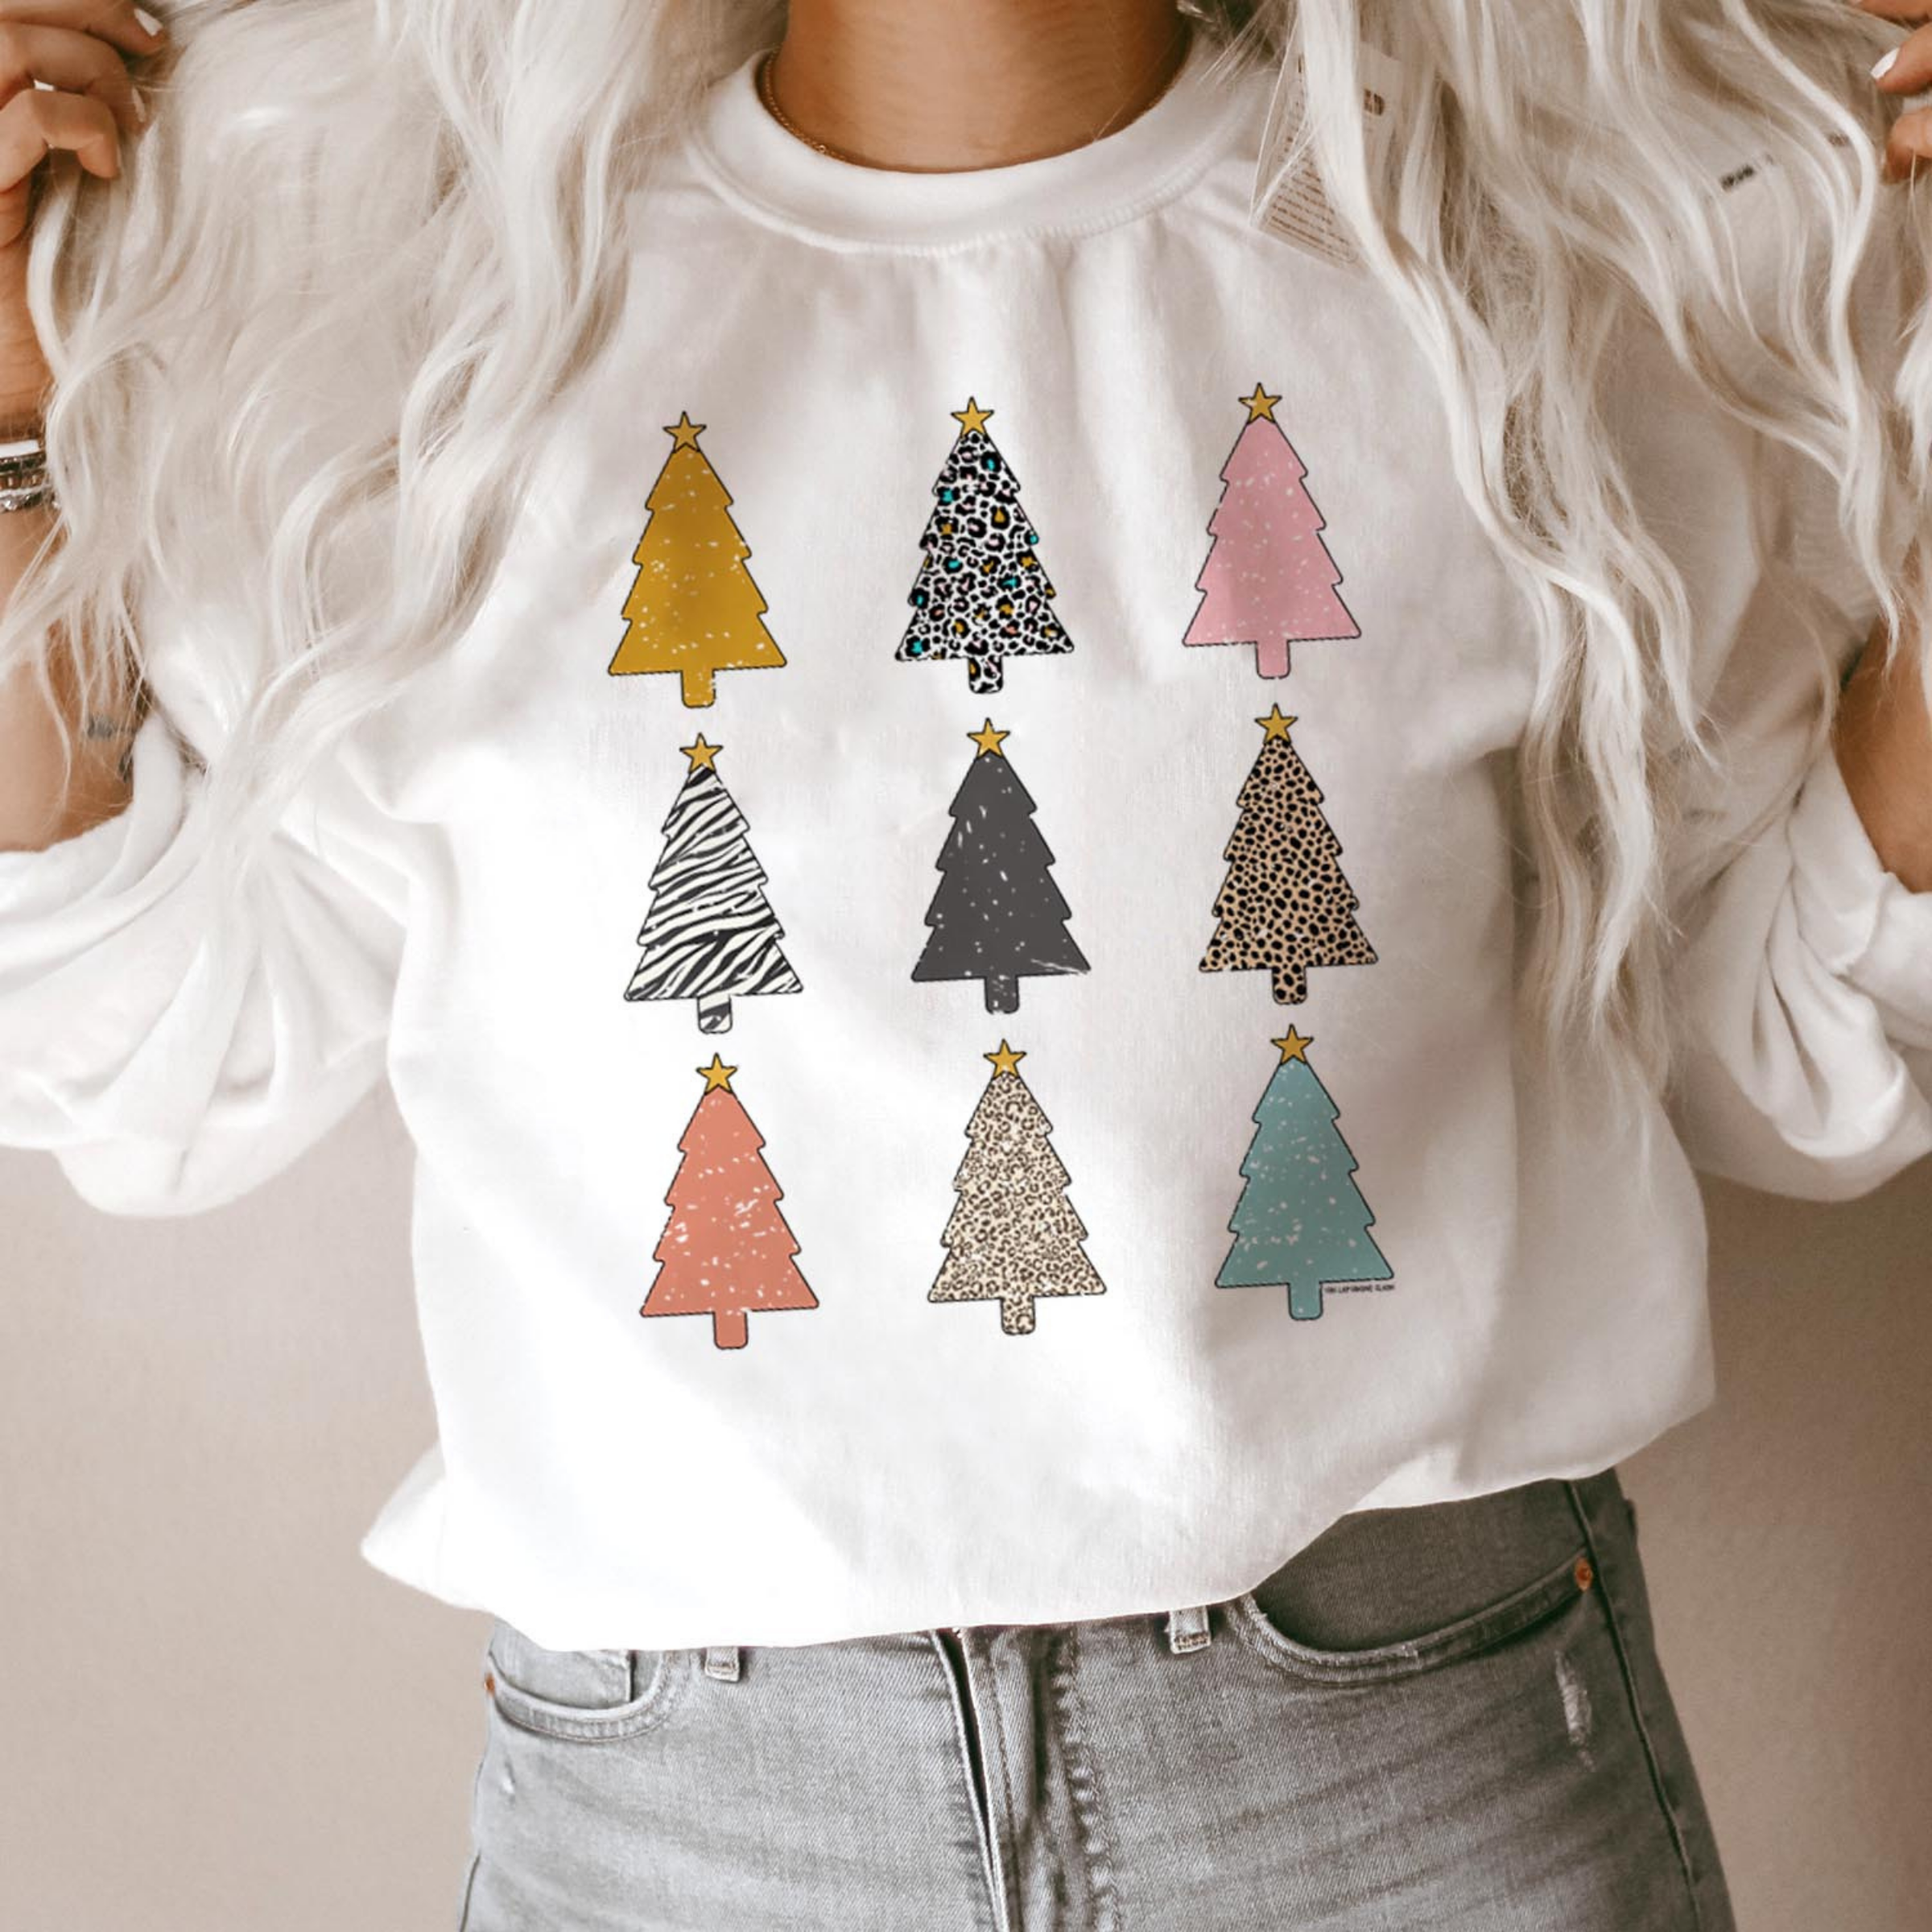 This white pullover includes a crew neckline, long sleeves, and three rows of three multi print Christmas tree collage graphic. This sweatshirt is modeled with rolled sleeves and a light wash pair of denim jeans. 